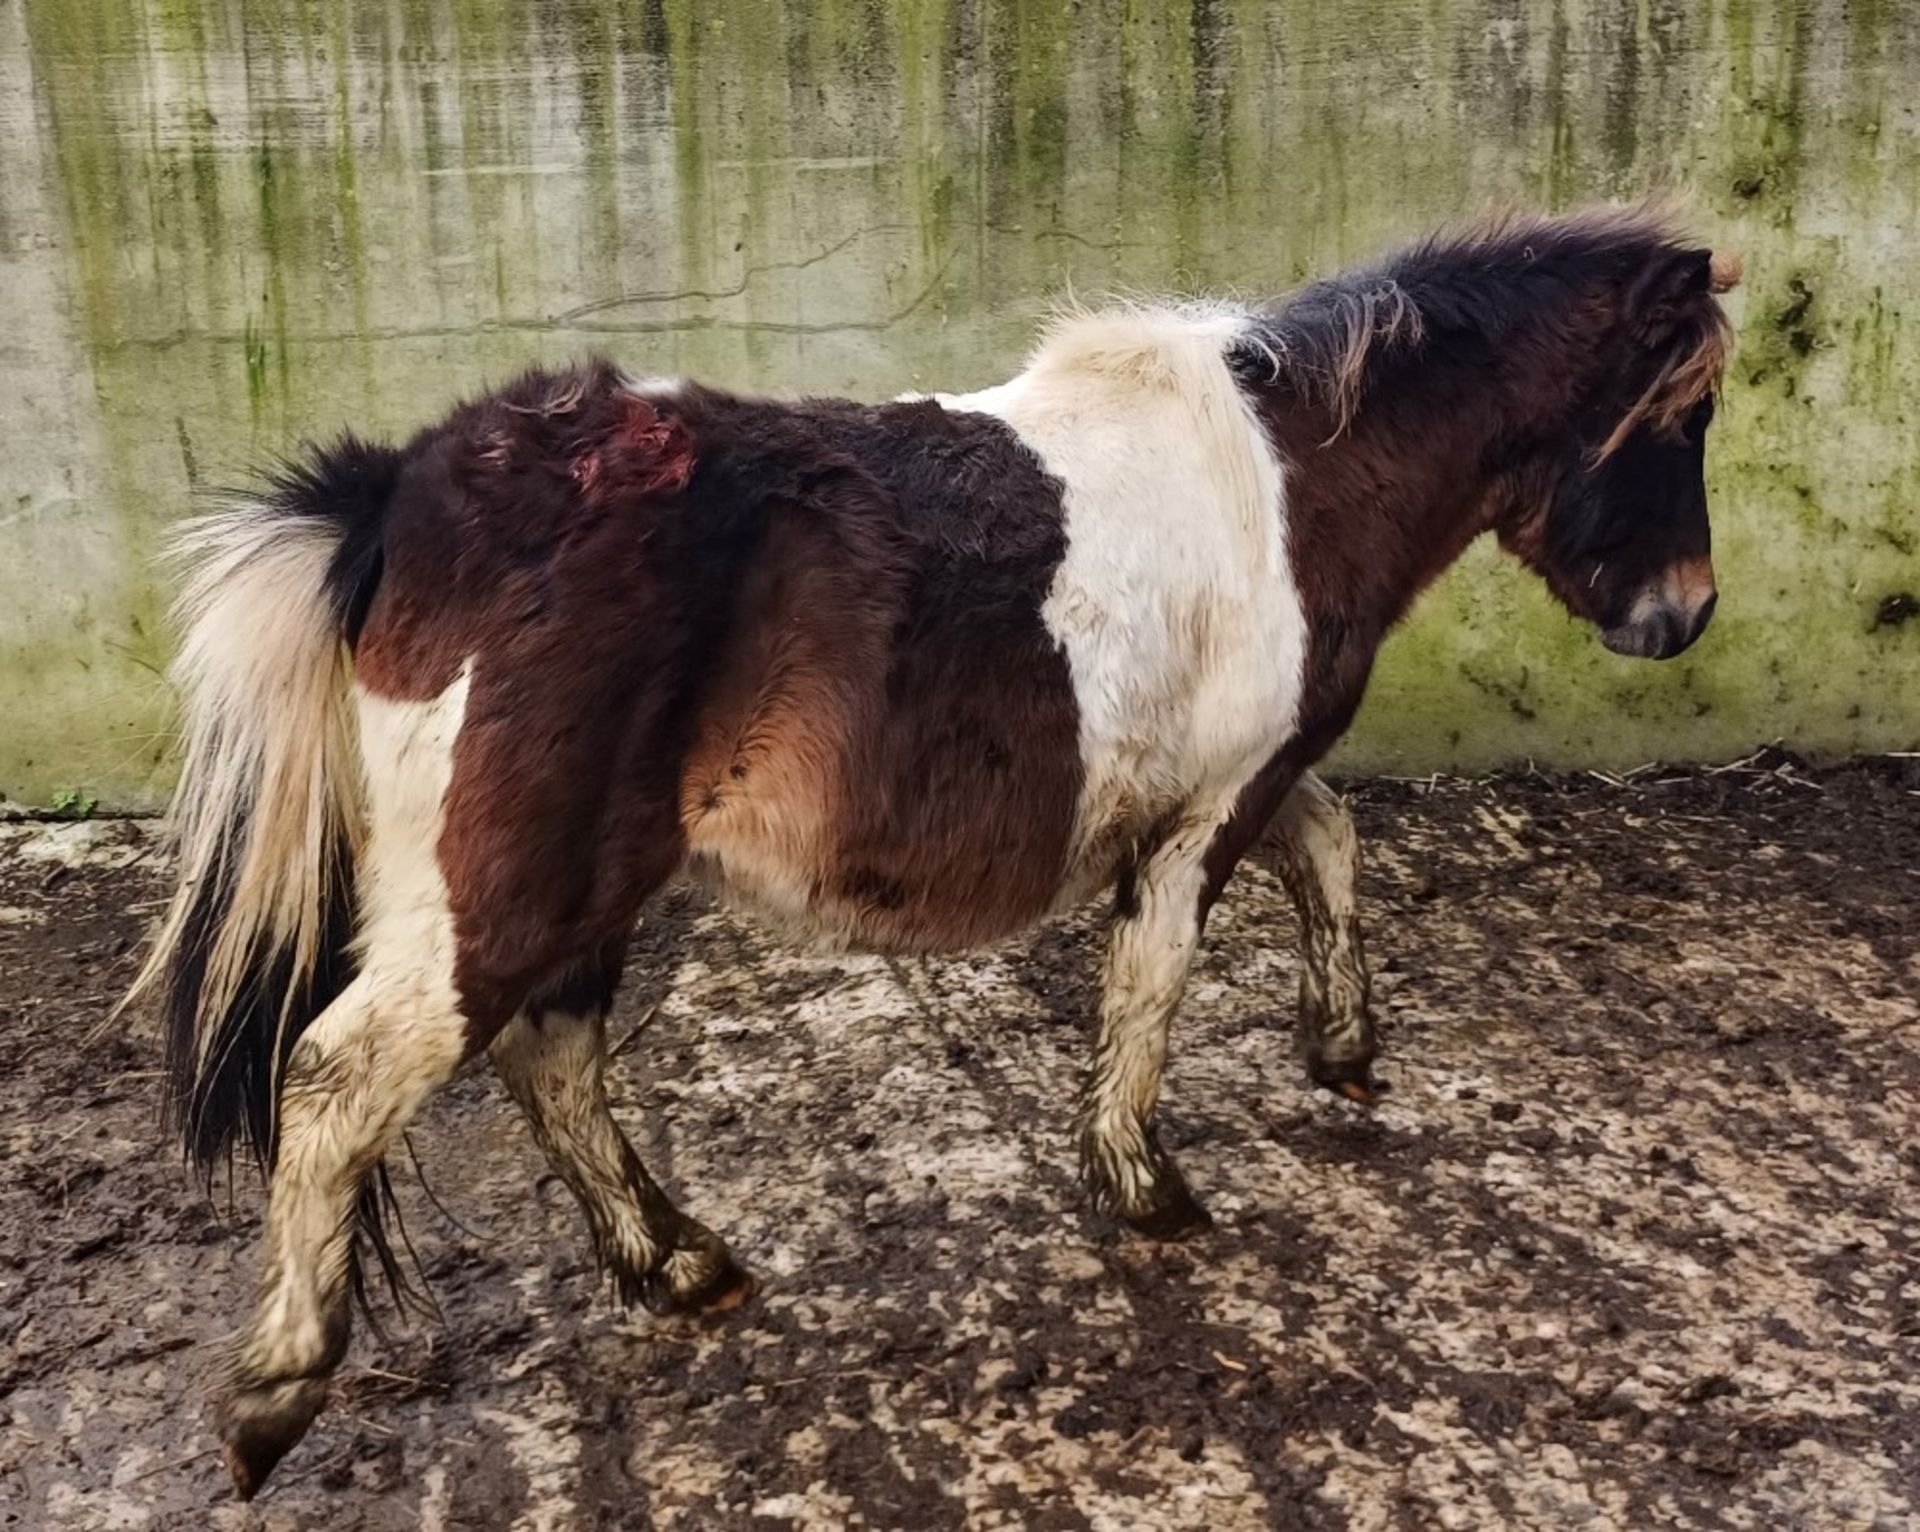 'GODSWORTHY SPICE' DARTMOOR HILL PONY SKEWBALD COLT APPROX 18 MONTHS OLD - Image 12 of 12